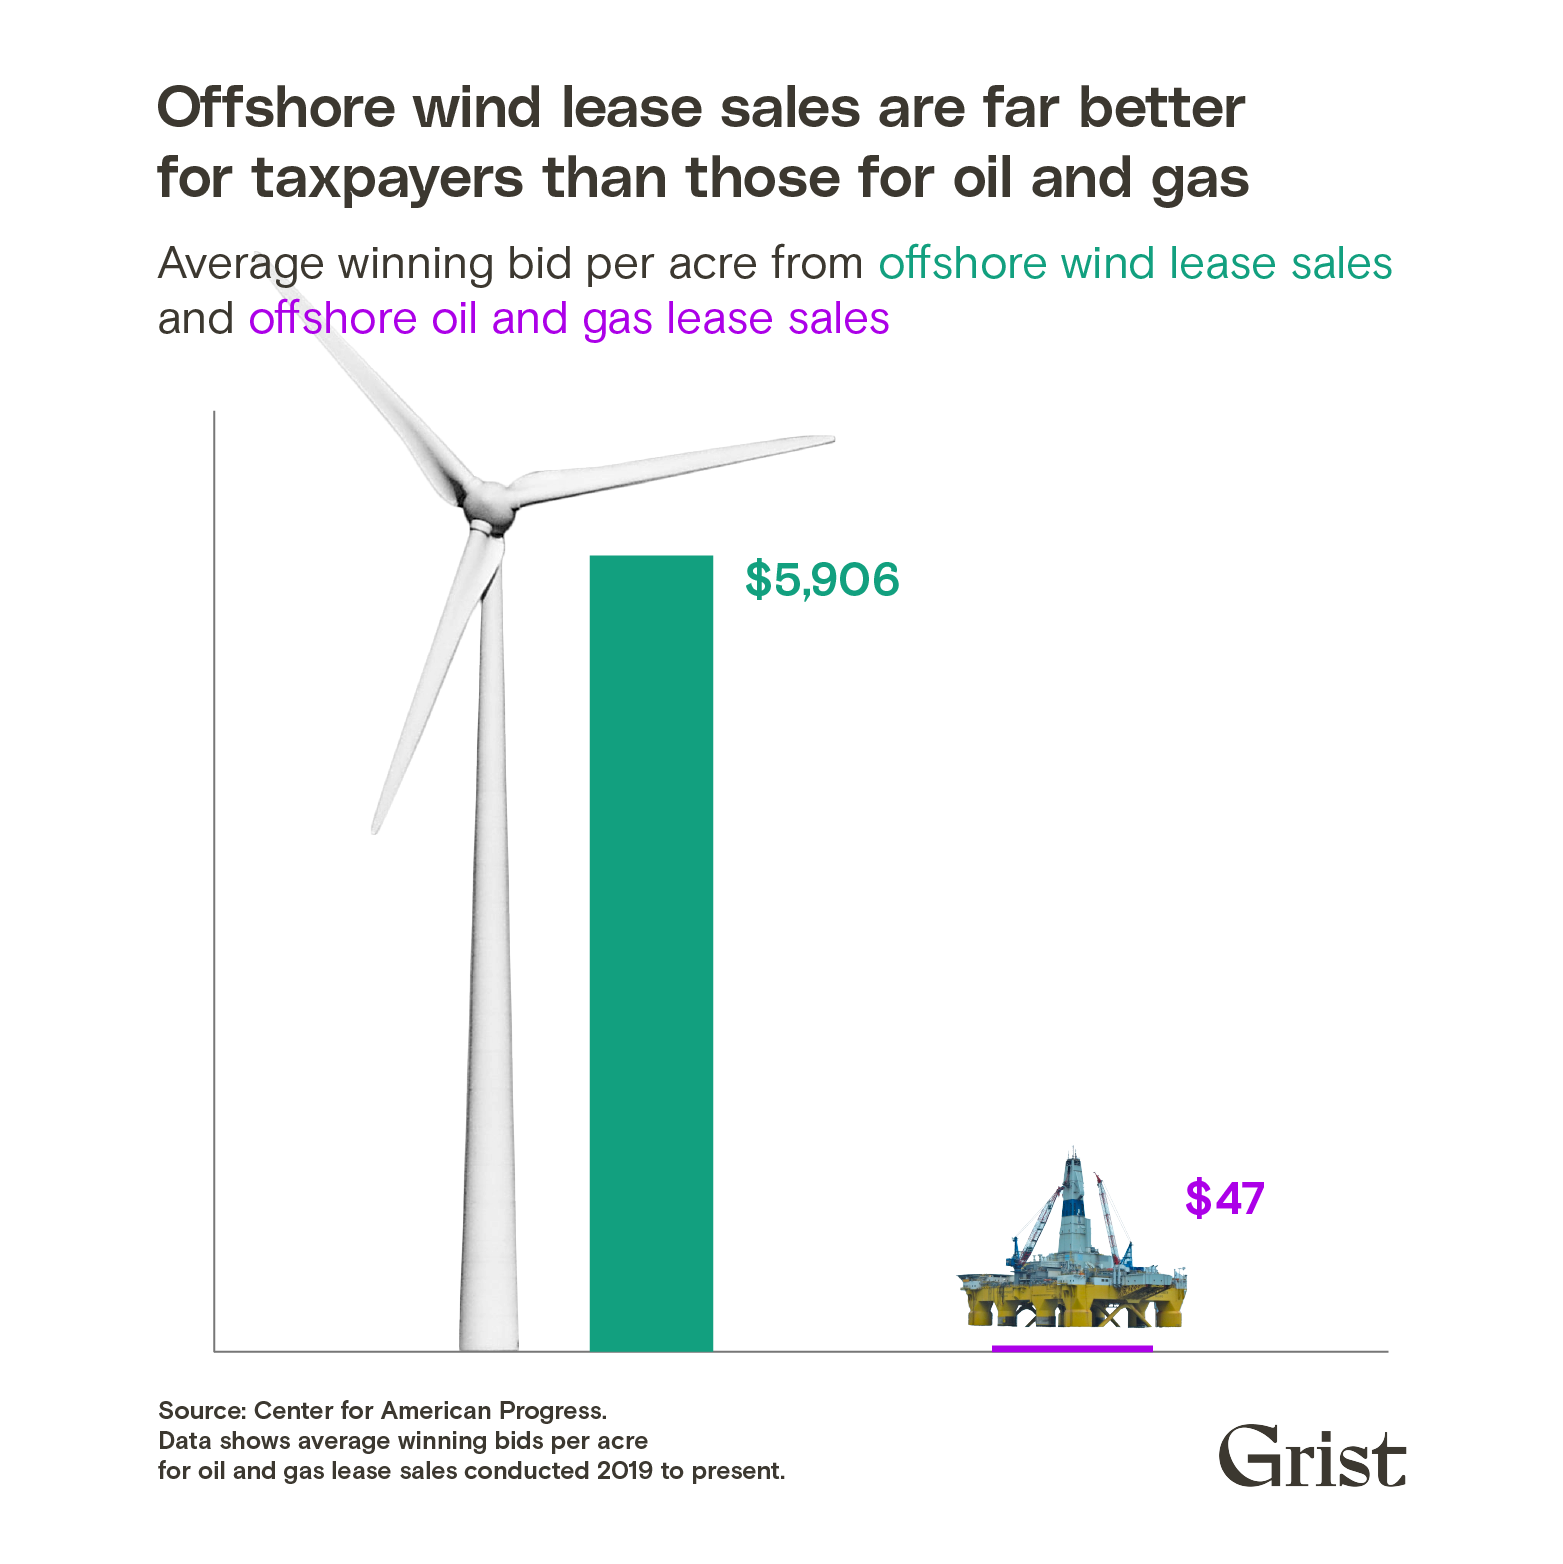 Bar chart shows offshore wind lease sales result in 125x the revenue per acre as offshore oil and gas lease sales.